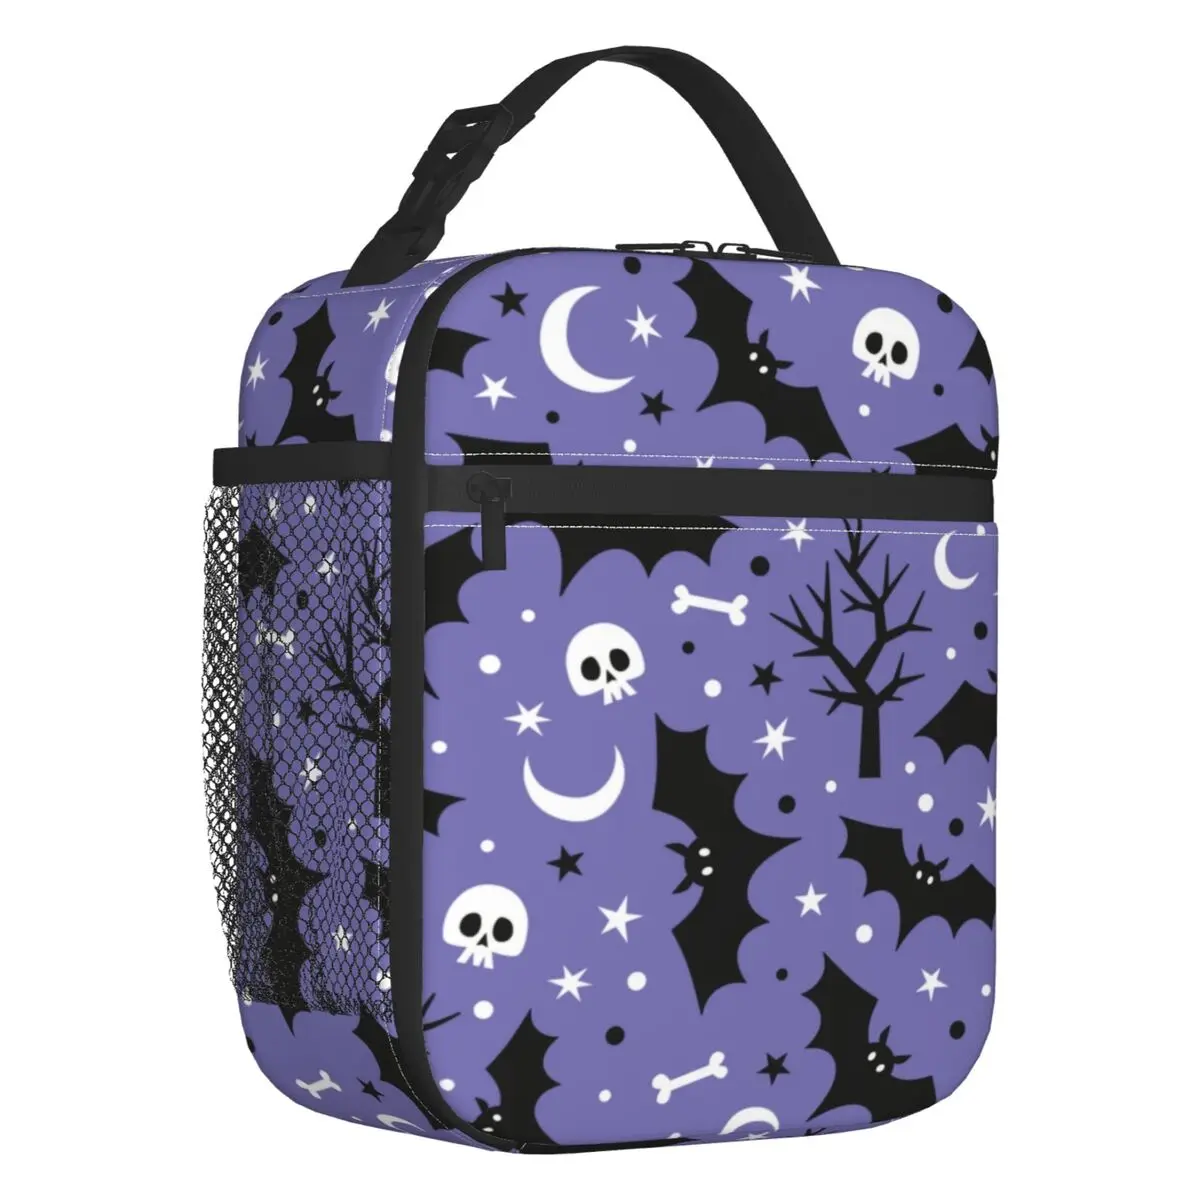 Halloween Spooky Bats Skull Portable Lunch Boxes for Women Goth Occult Witch Thermal Cooler Food Insulated Lunch Bag Kids School